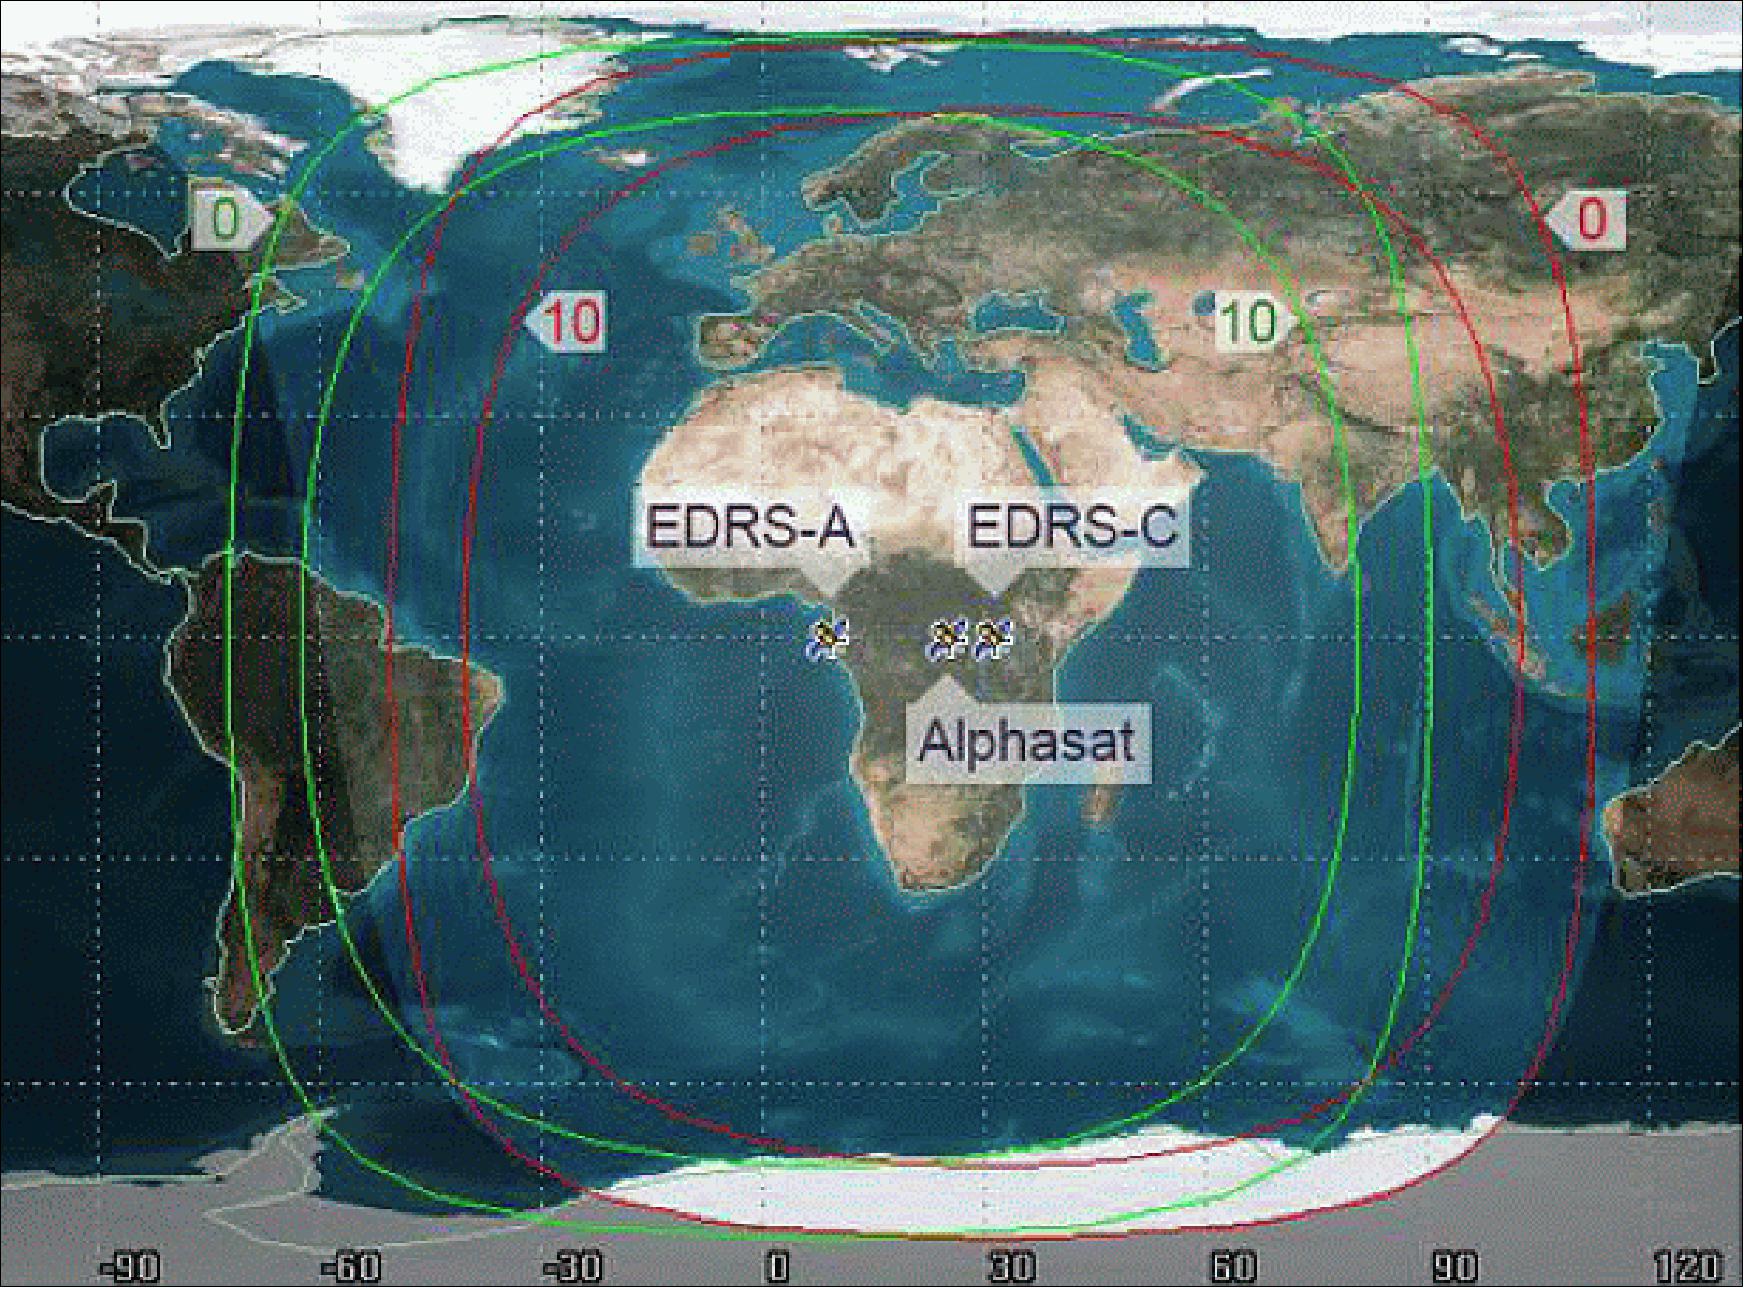 Figure 33: Orbital positions as well as visibility contours for 0º and 10º elevation of the EDRS spacecraft (green – EDRS-A, red – EDRS-C), image credit: EDRS consortium 59)